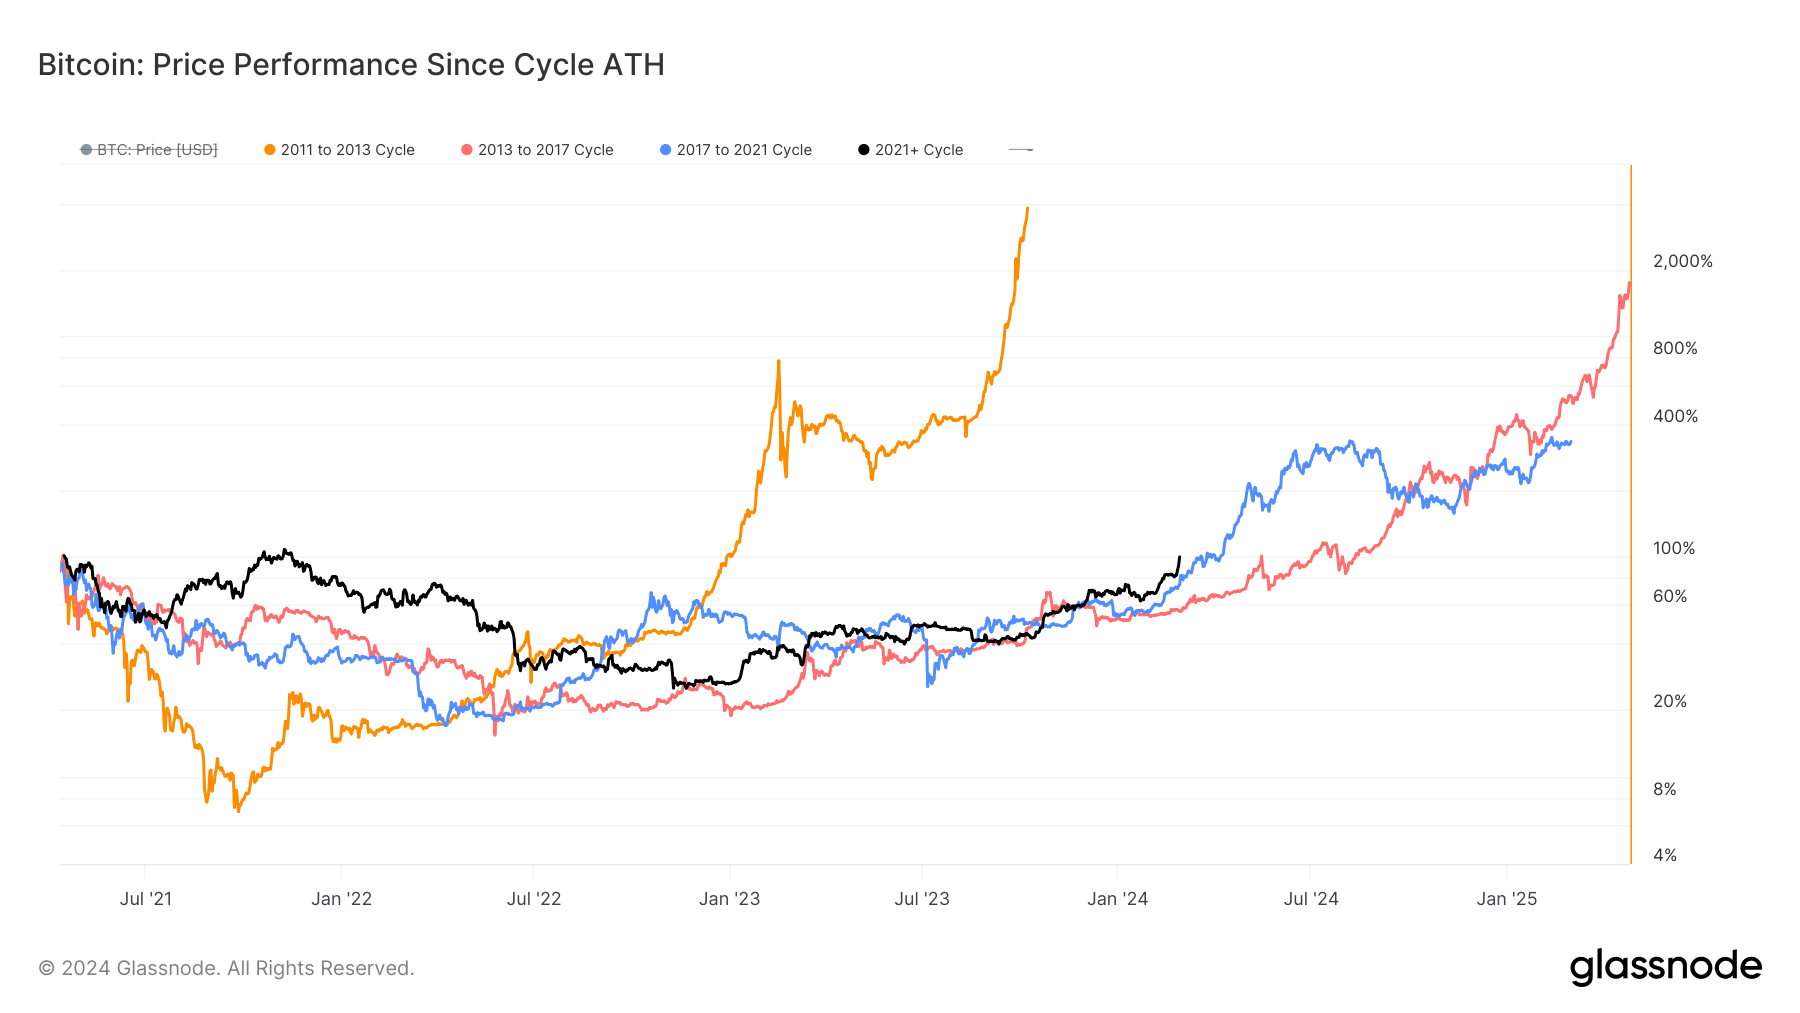 Price Performance since cycle ATH: (Source: Glassnode)